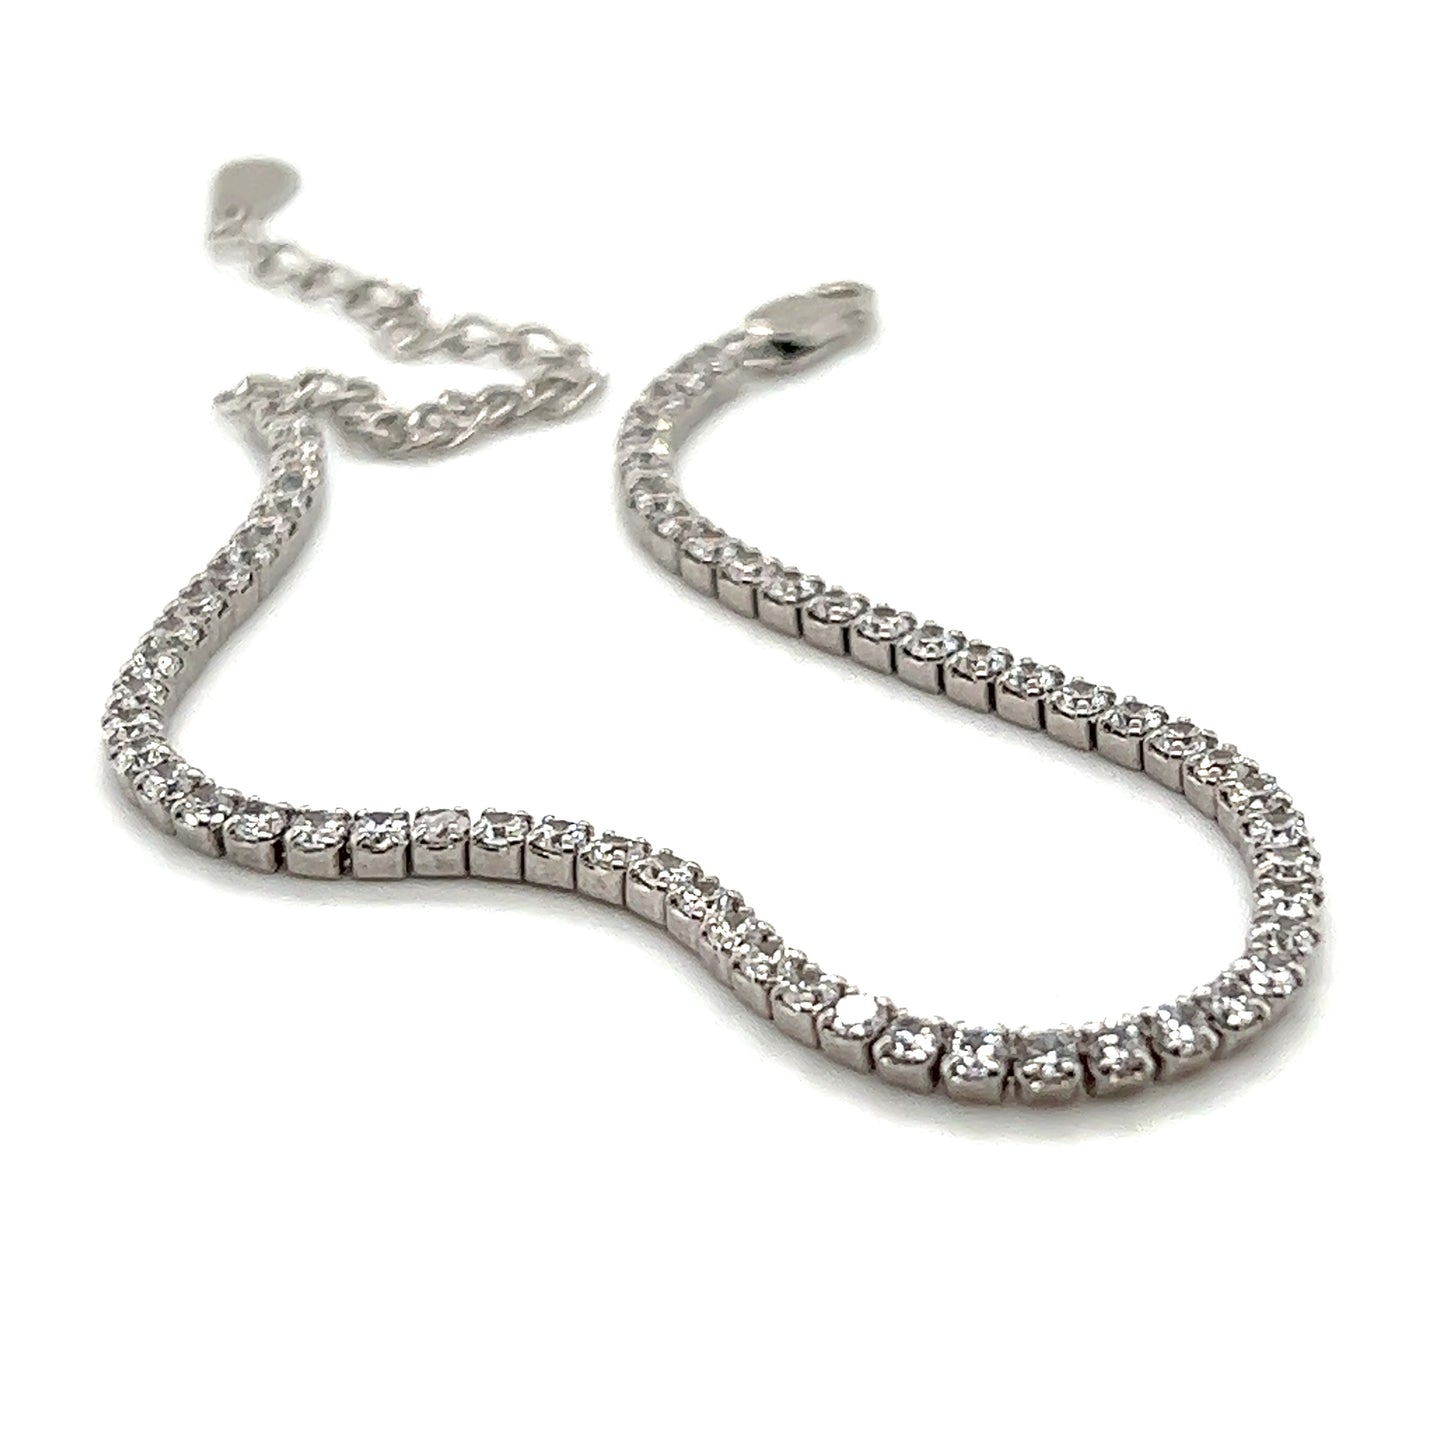 A sparkling Square Cubic Zirconia tennis bracelet from Super Silver on a white background.